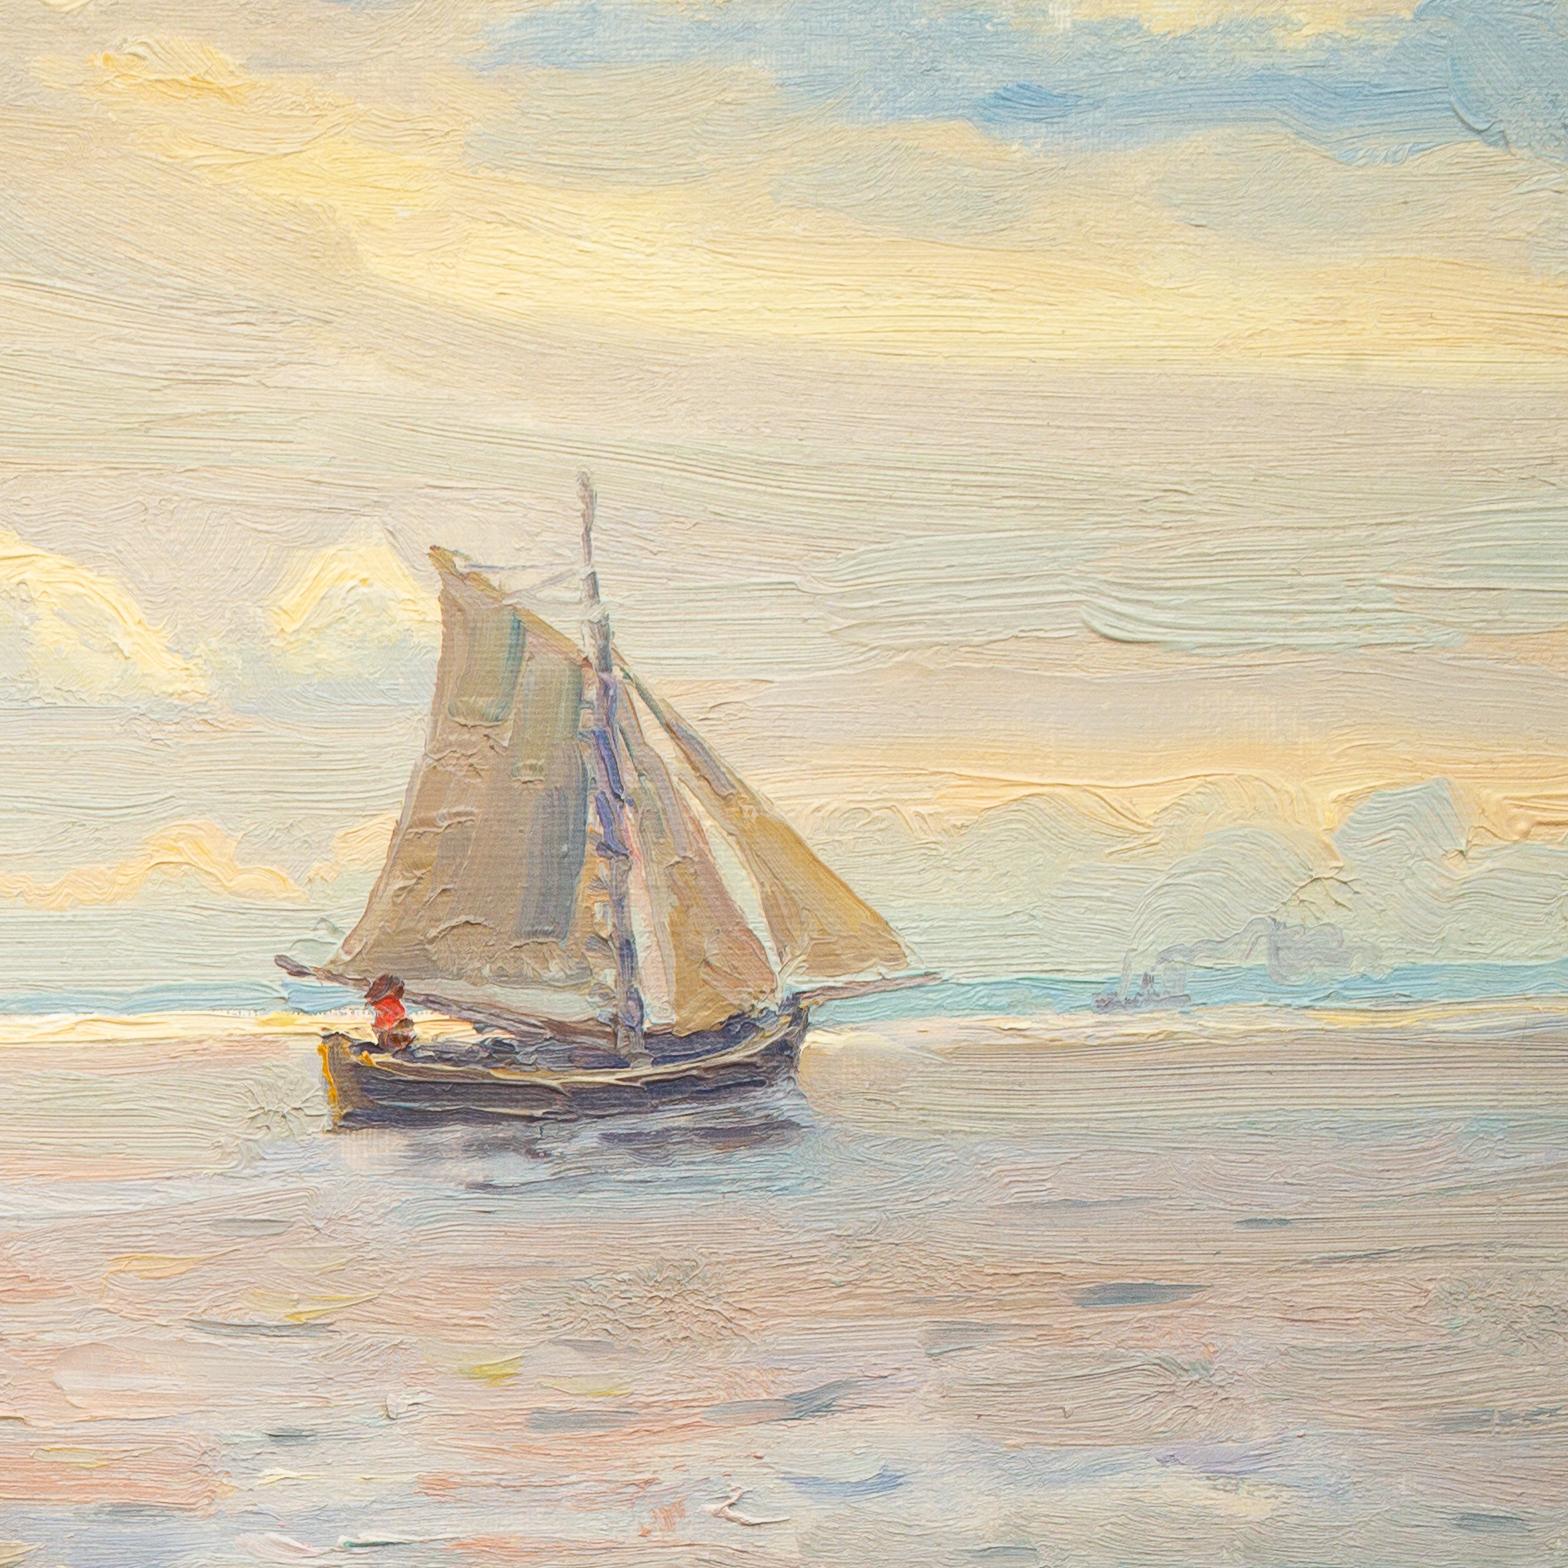 Justus Lundegård grew up in the Swedish village Hörby.
He started his art studies at the Royal Swedish Academy of Fine Arts 1880–84 and later in Munich and Paris where he switched to an Impressionist style. 
In this painting, we can see his later